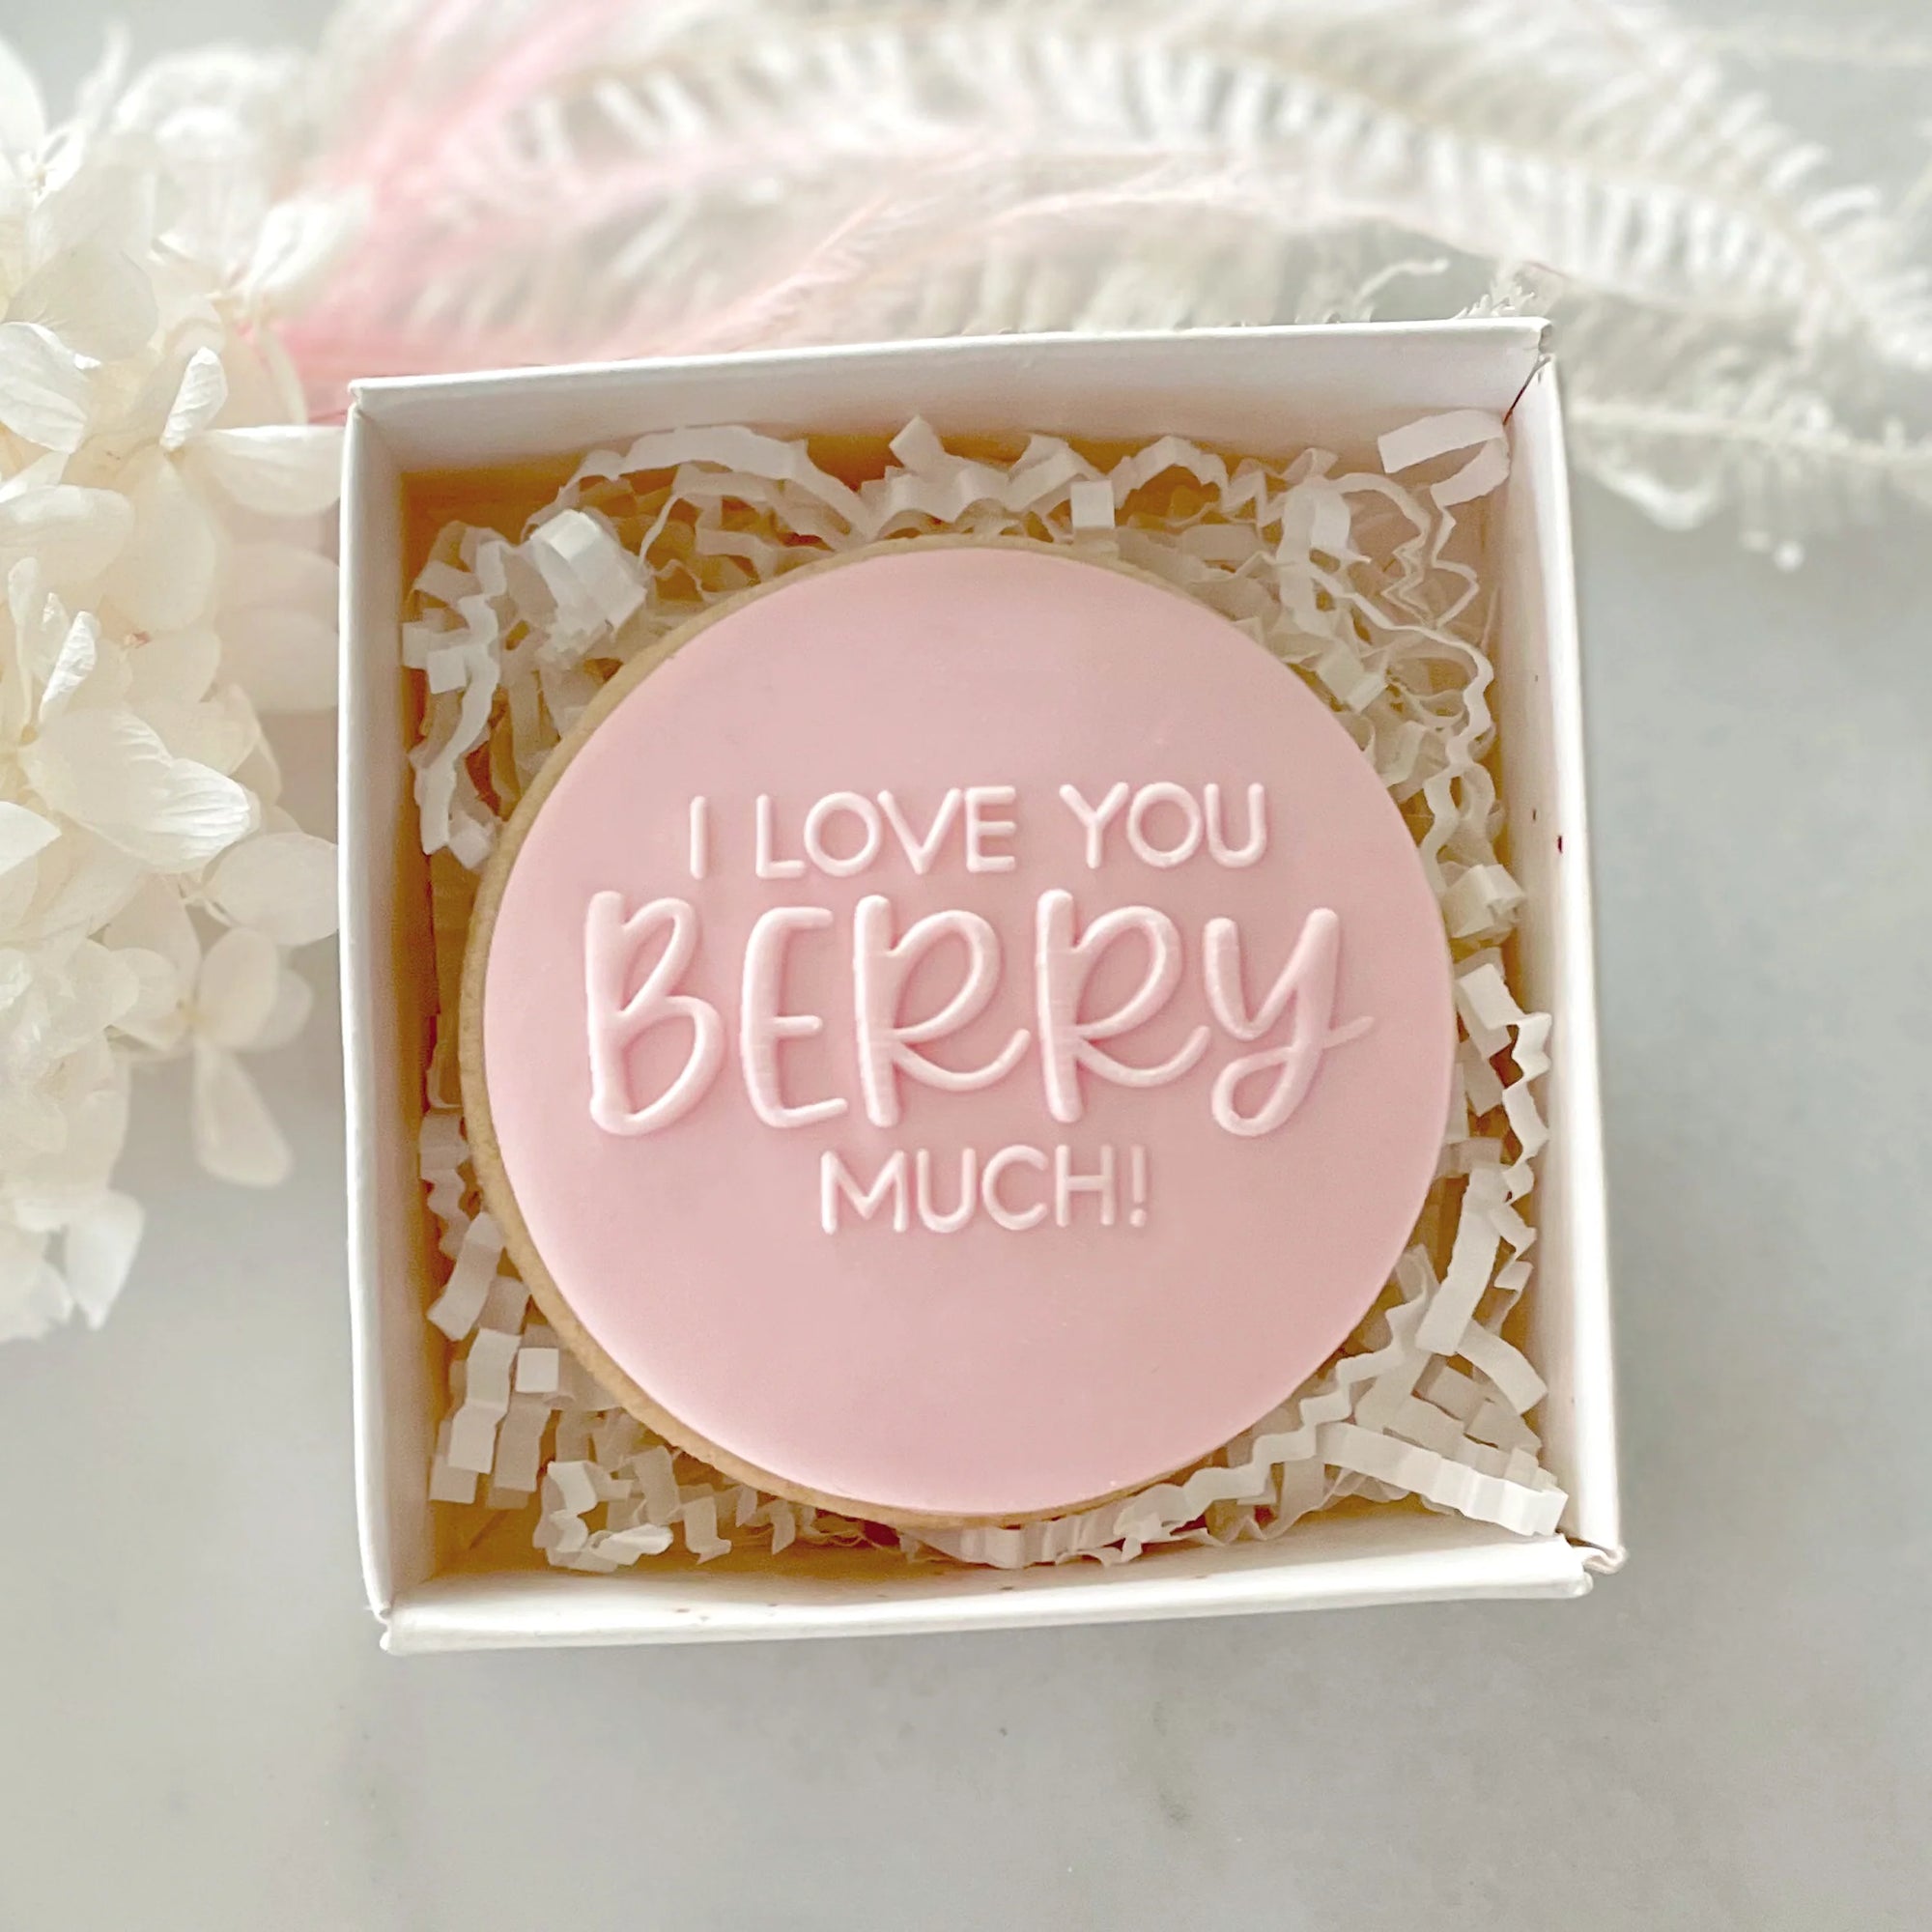 Love You Berry Much Debosser by Little Biskut Level Up!